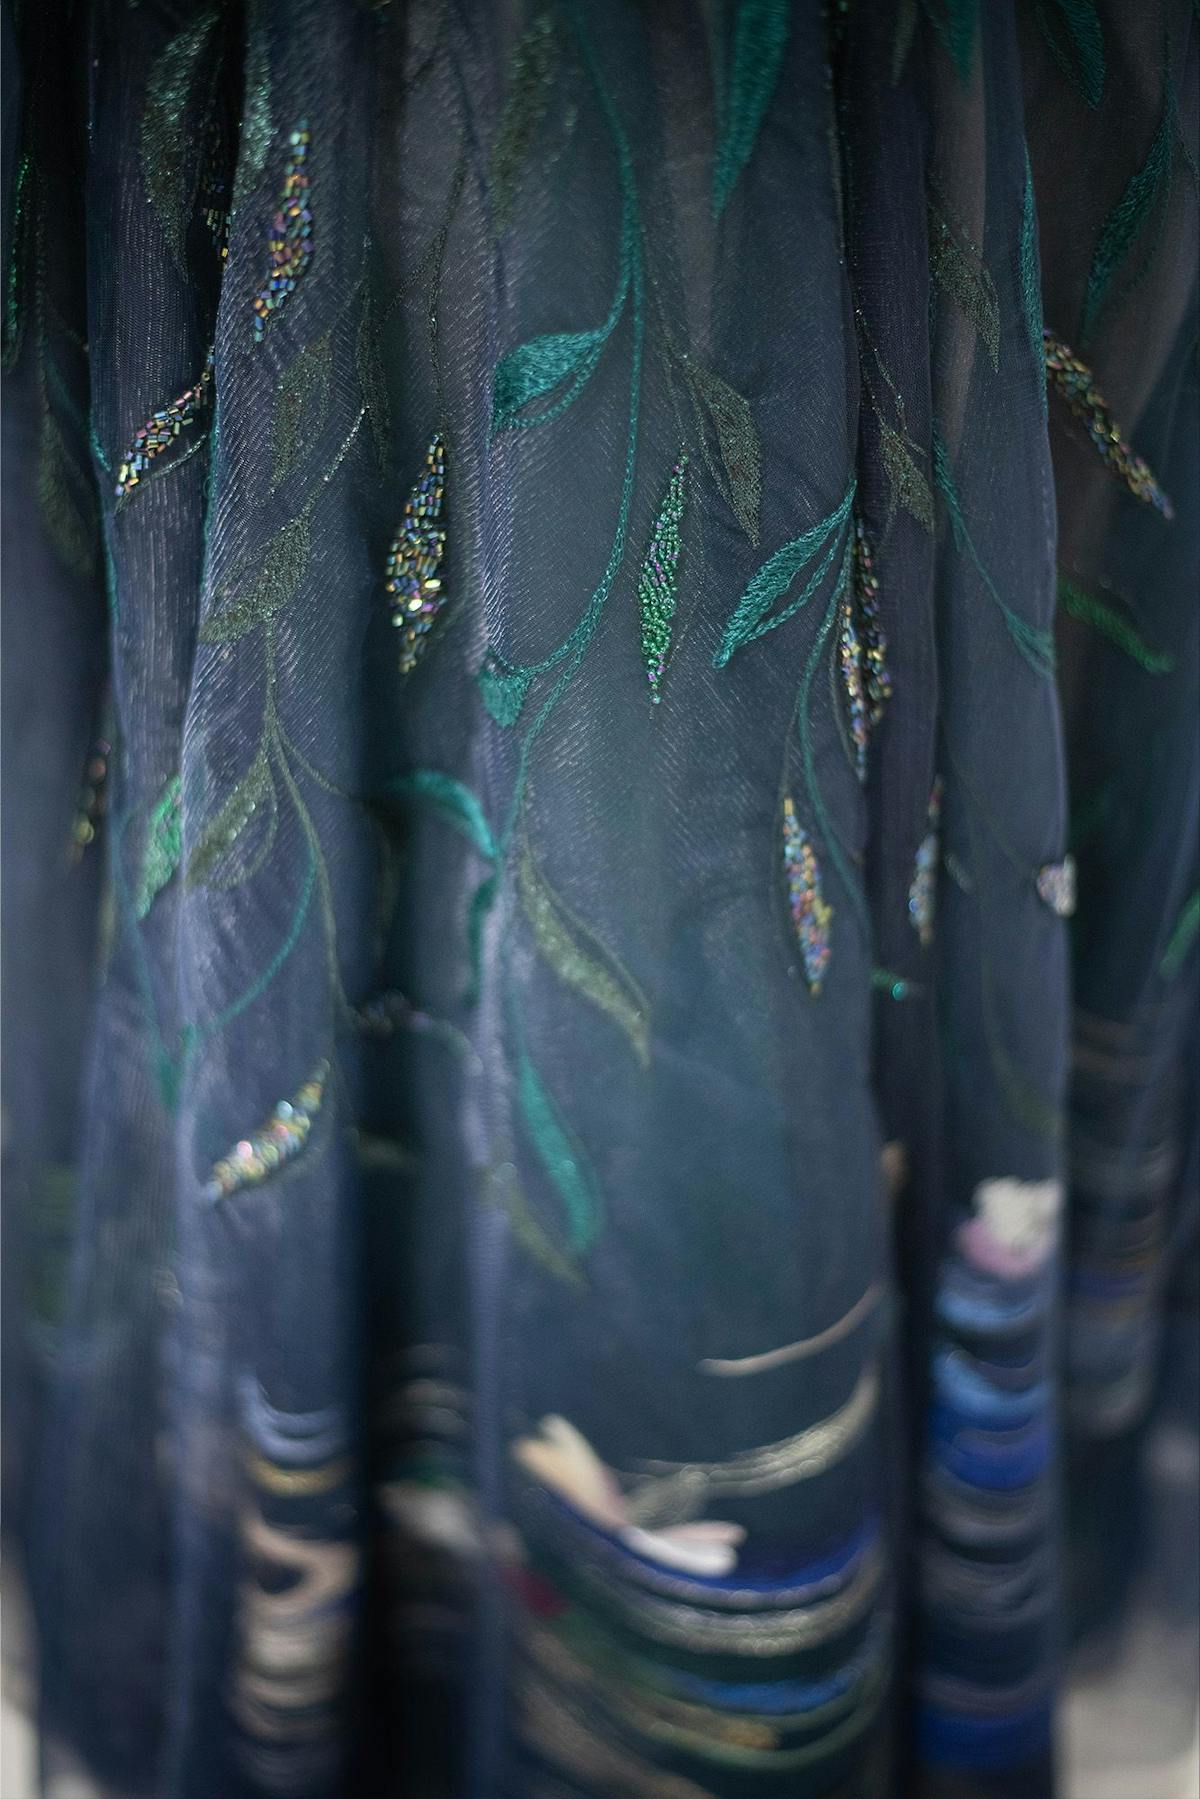 a close-up of the embroidered leaves in the skirt